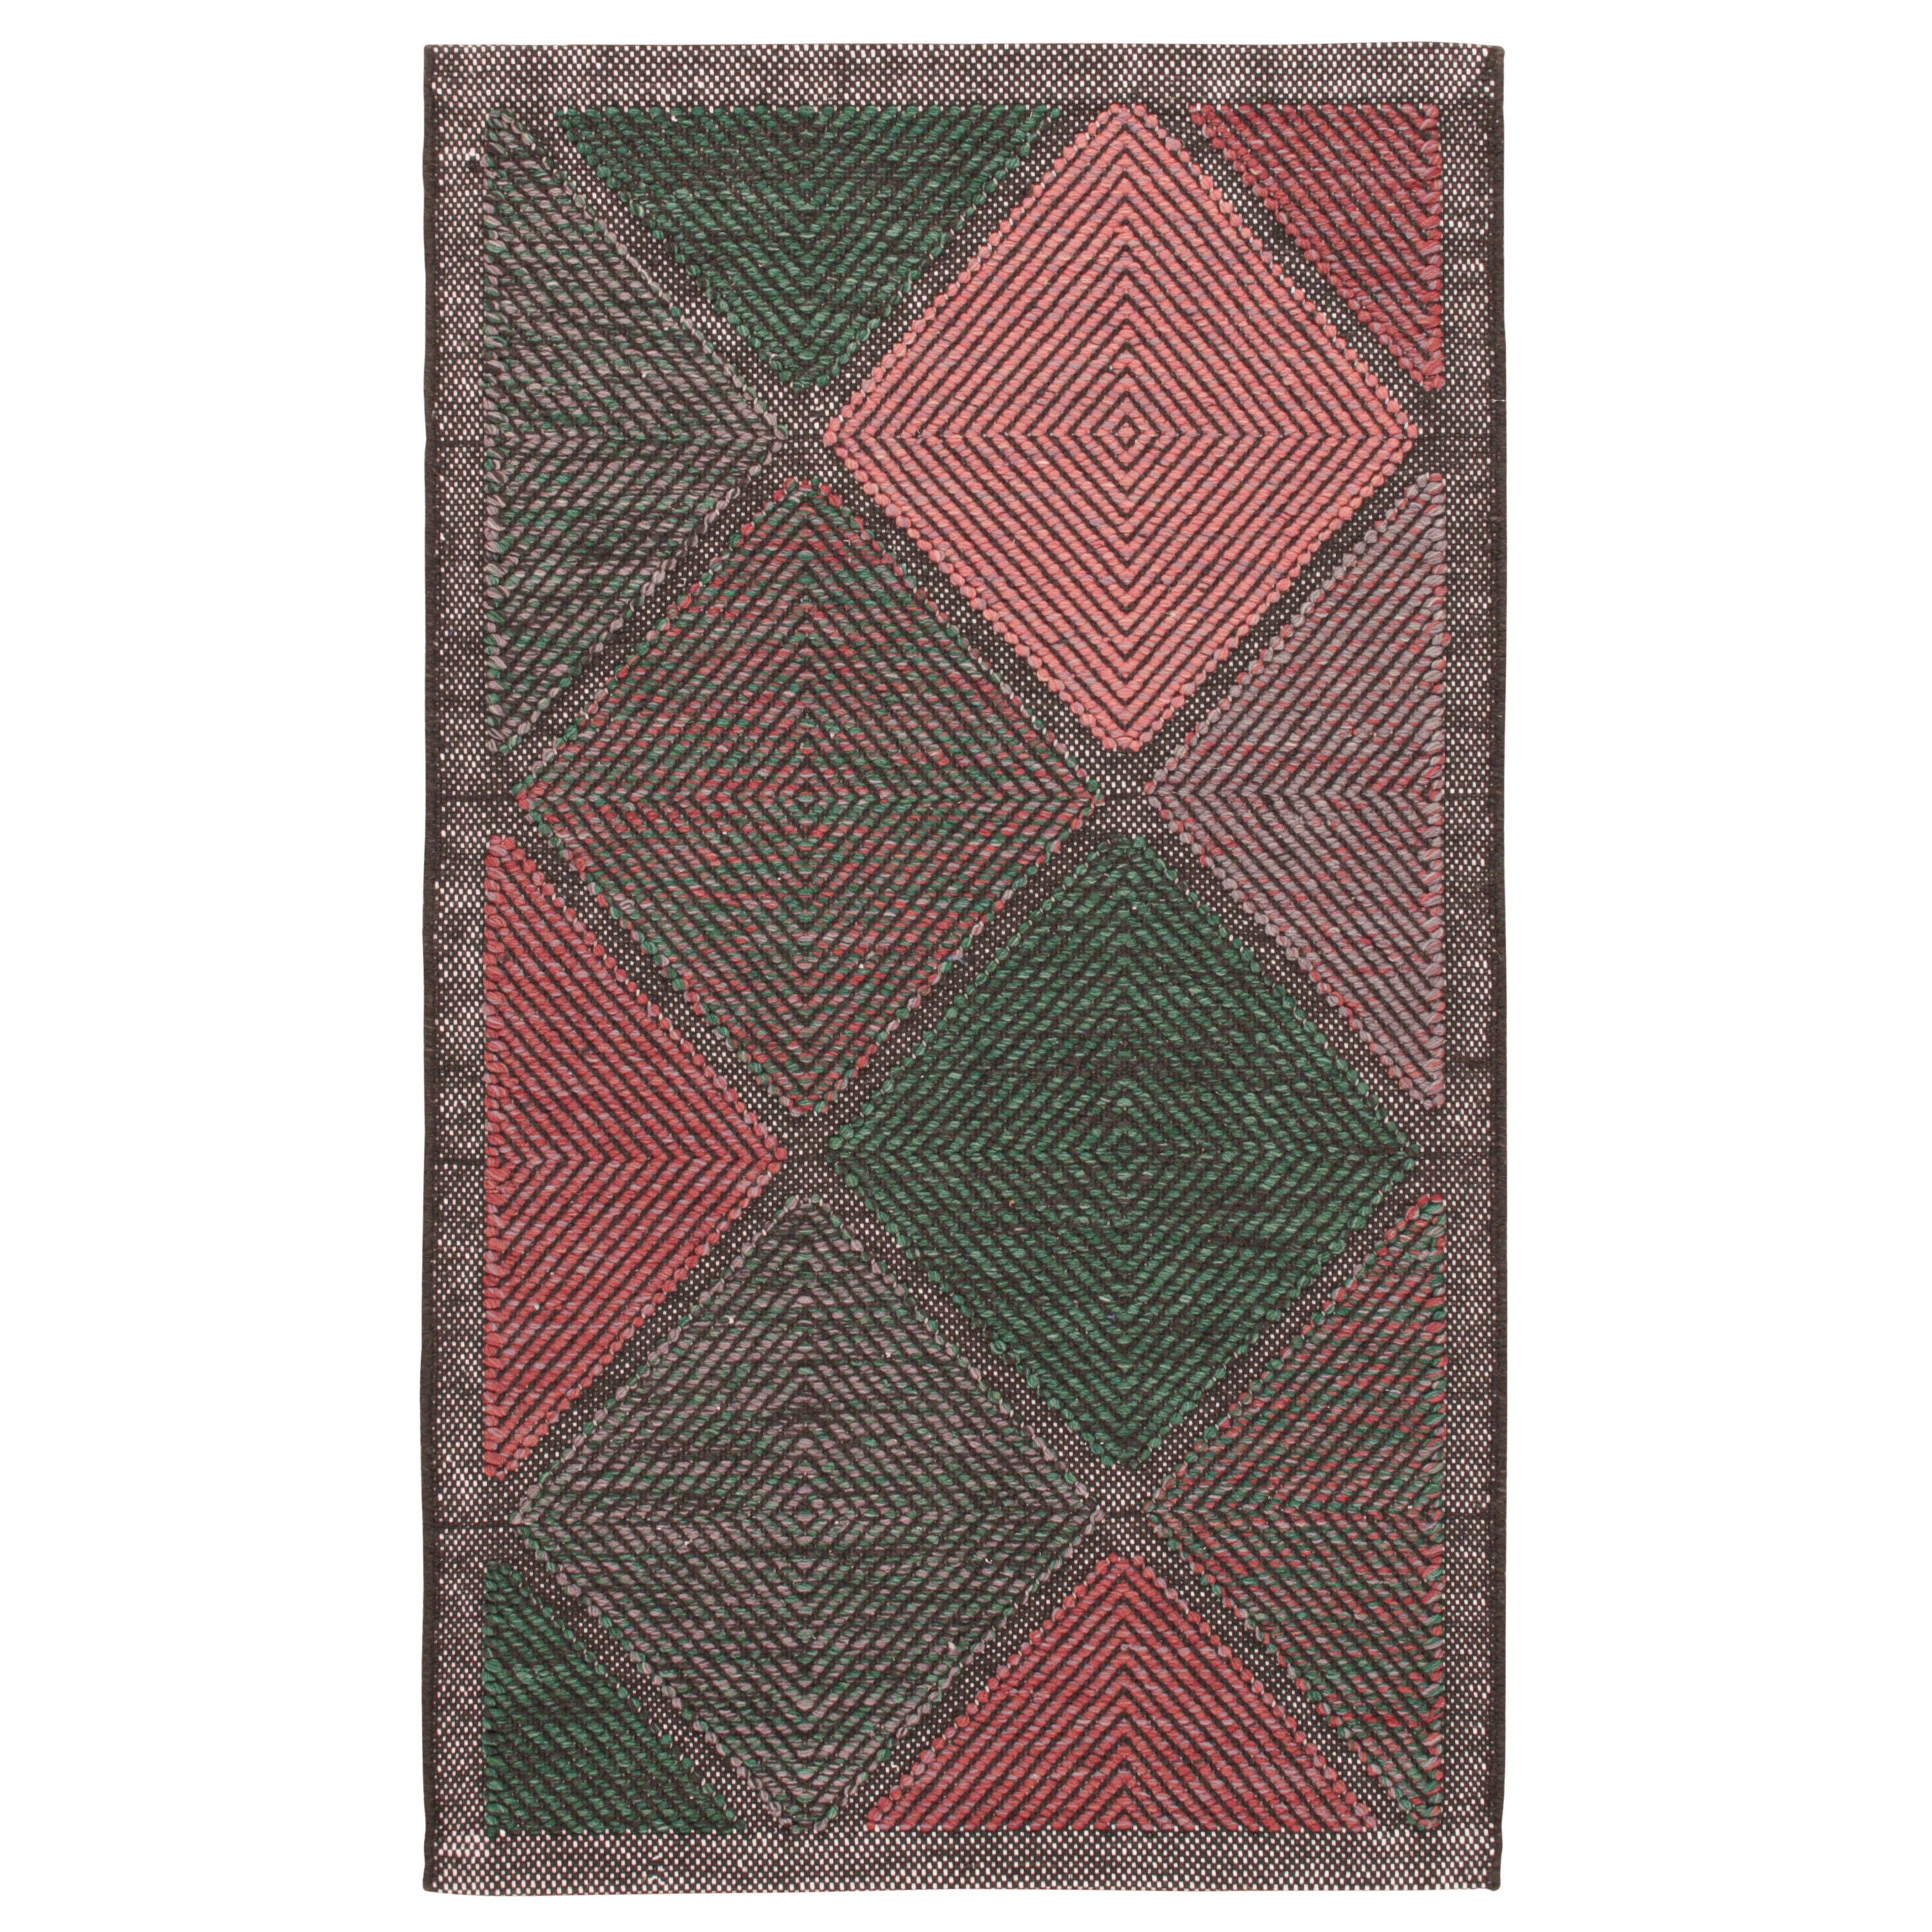 Rug & Kilim’s Scandinavian style Kilim in Brown, Pink and Teal Diamond Patterns For Sale